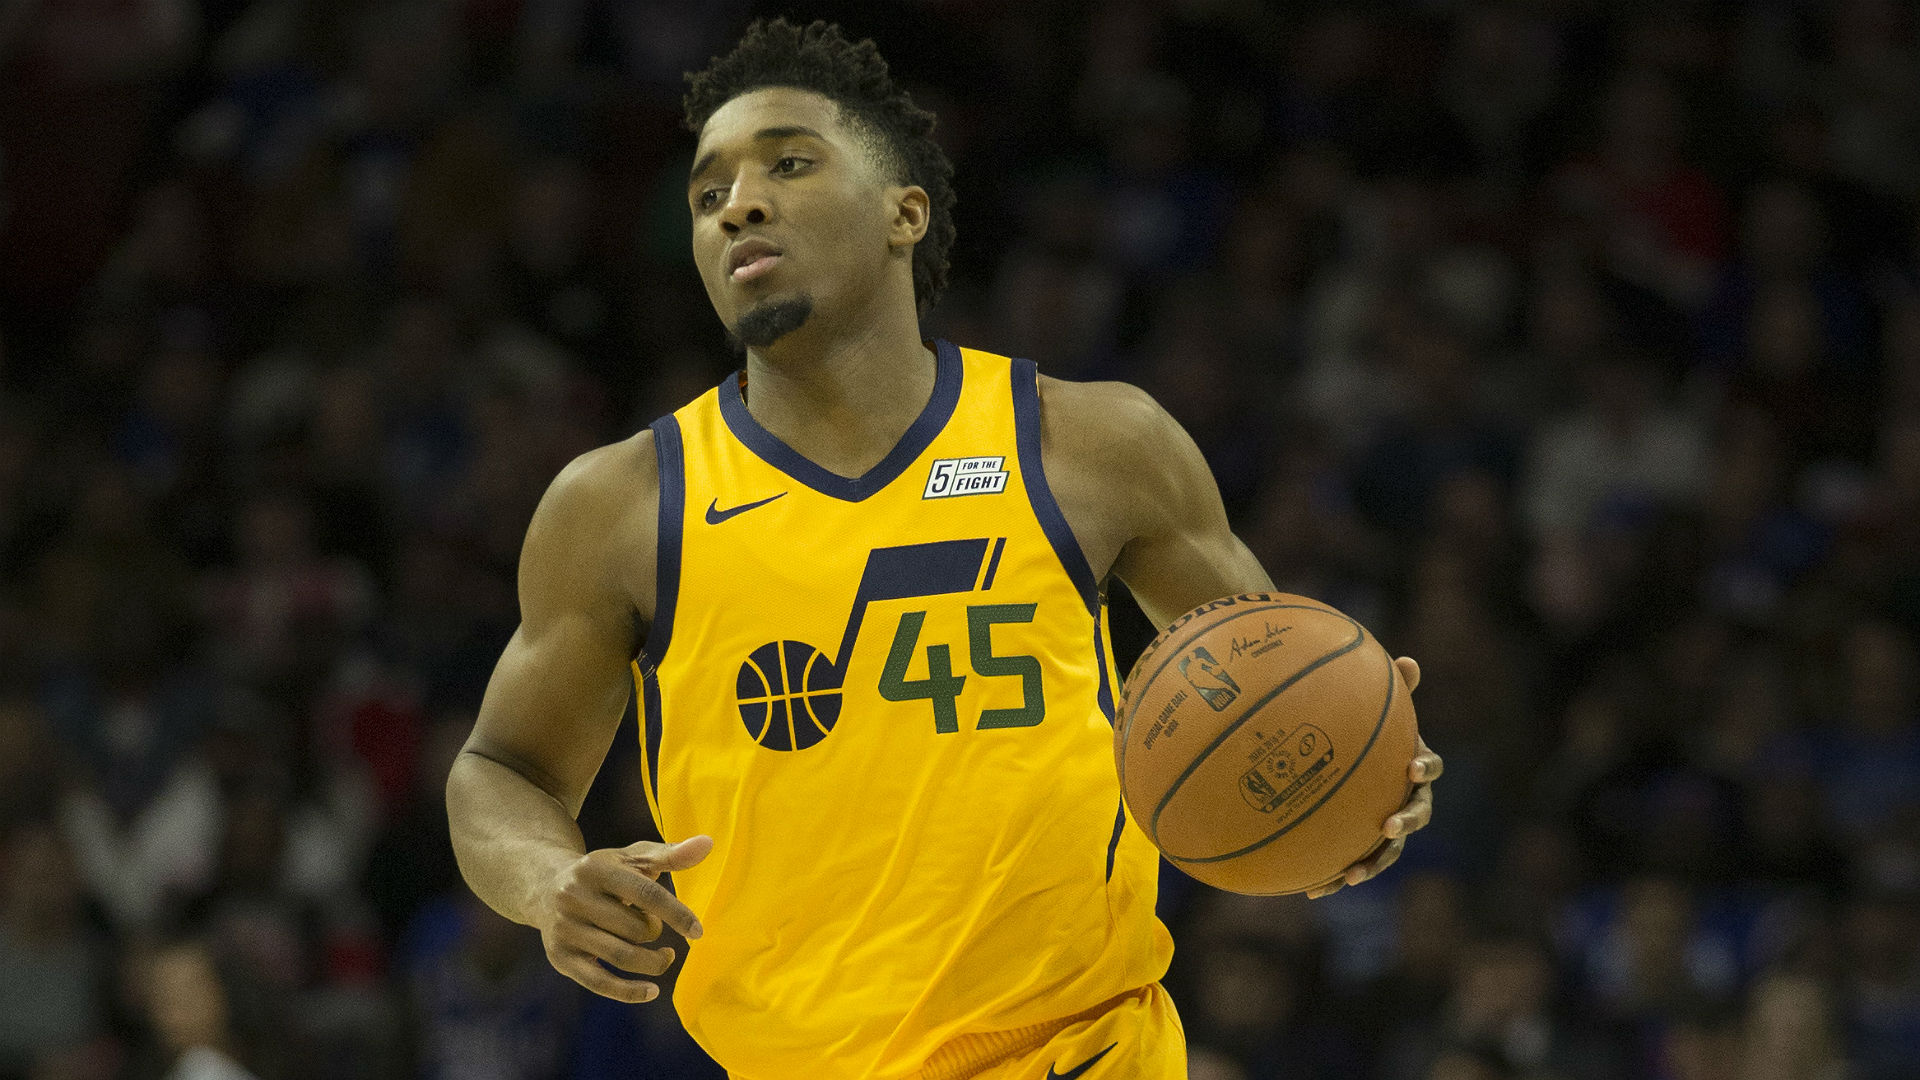 Utah Jazz guard Donovan Mitchell was recently summoned for jury duty, but the team let the state of Utah know that now is not a good time.